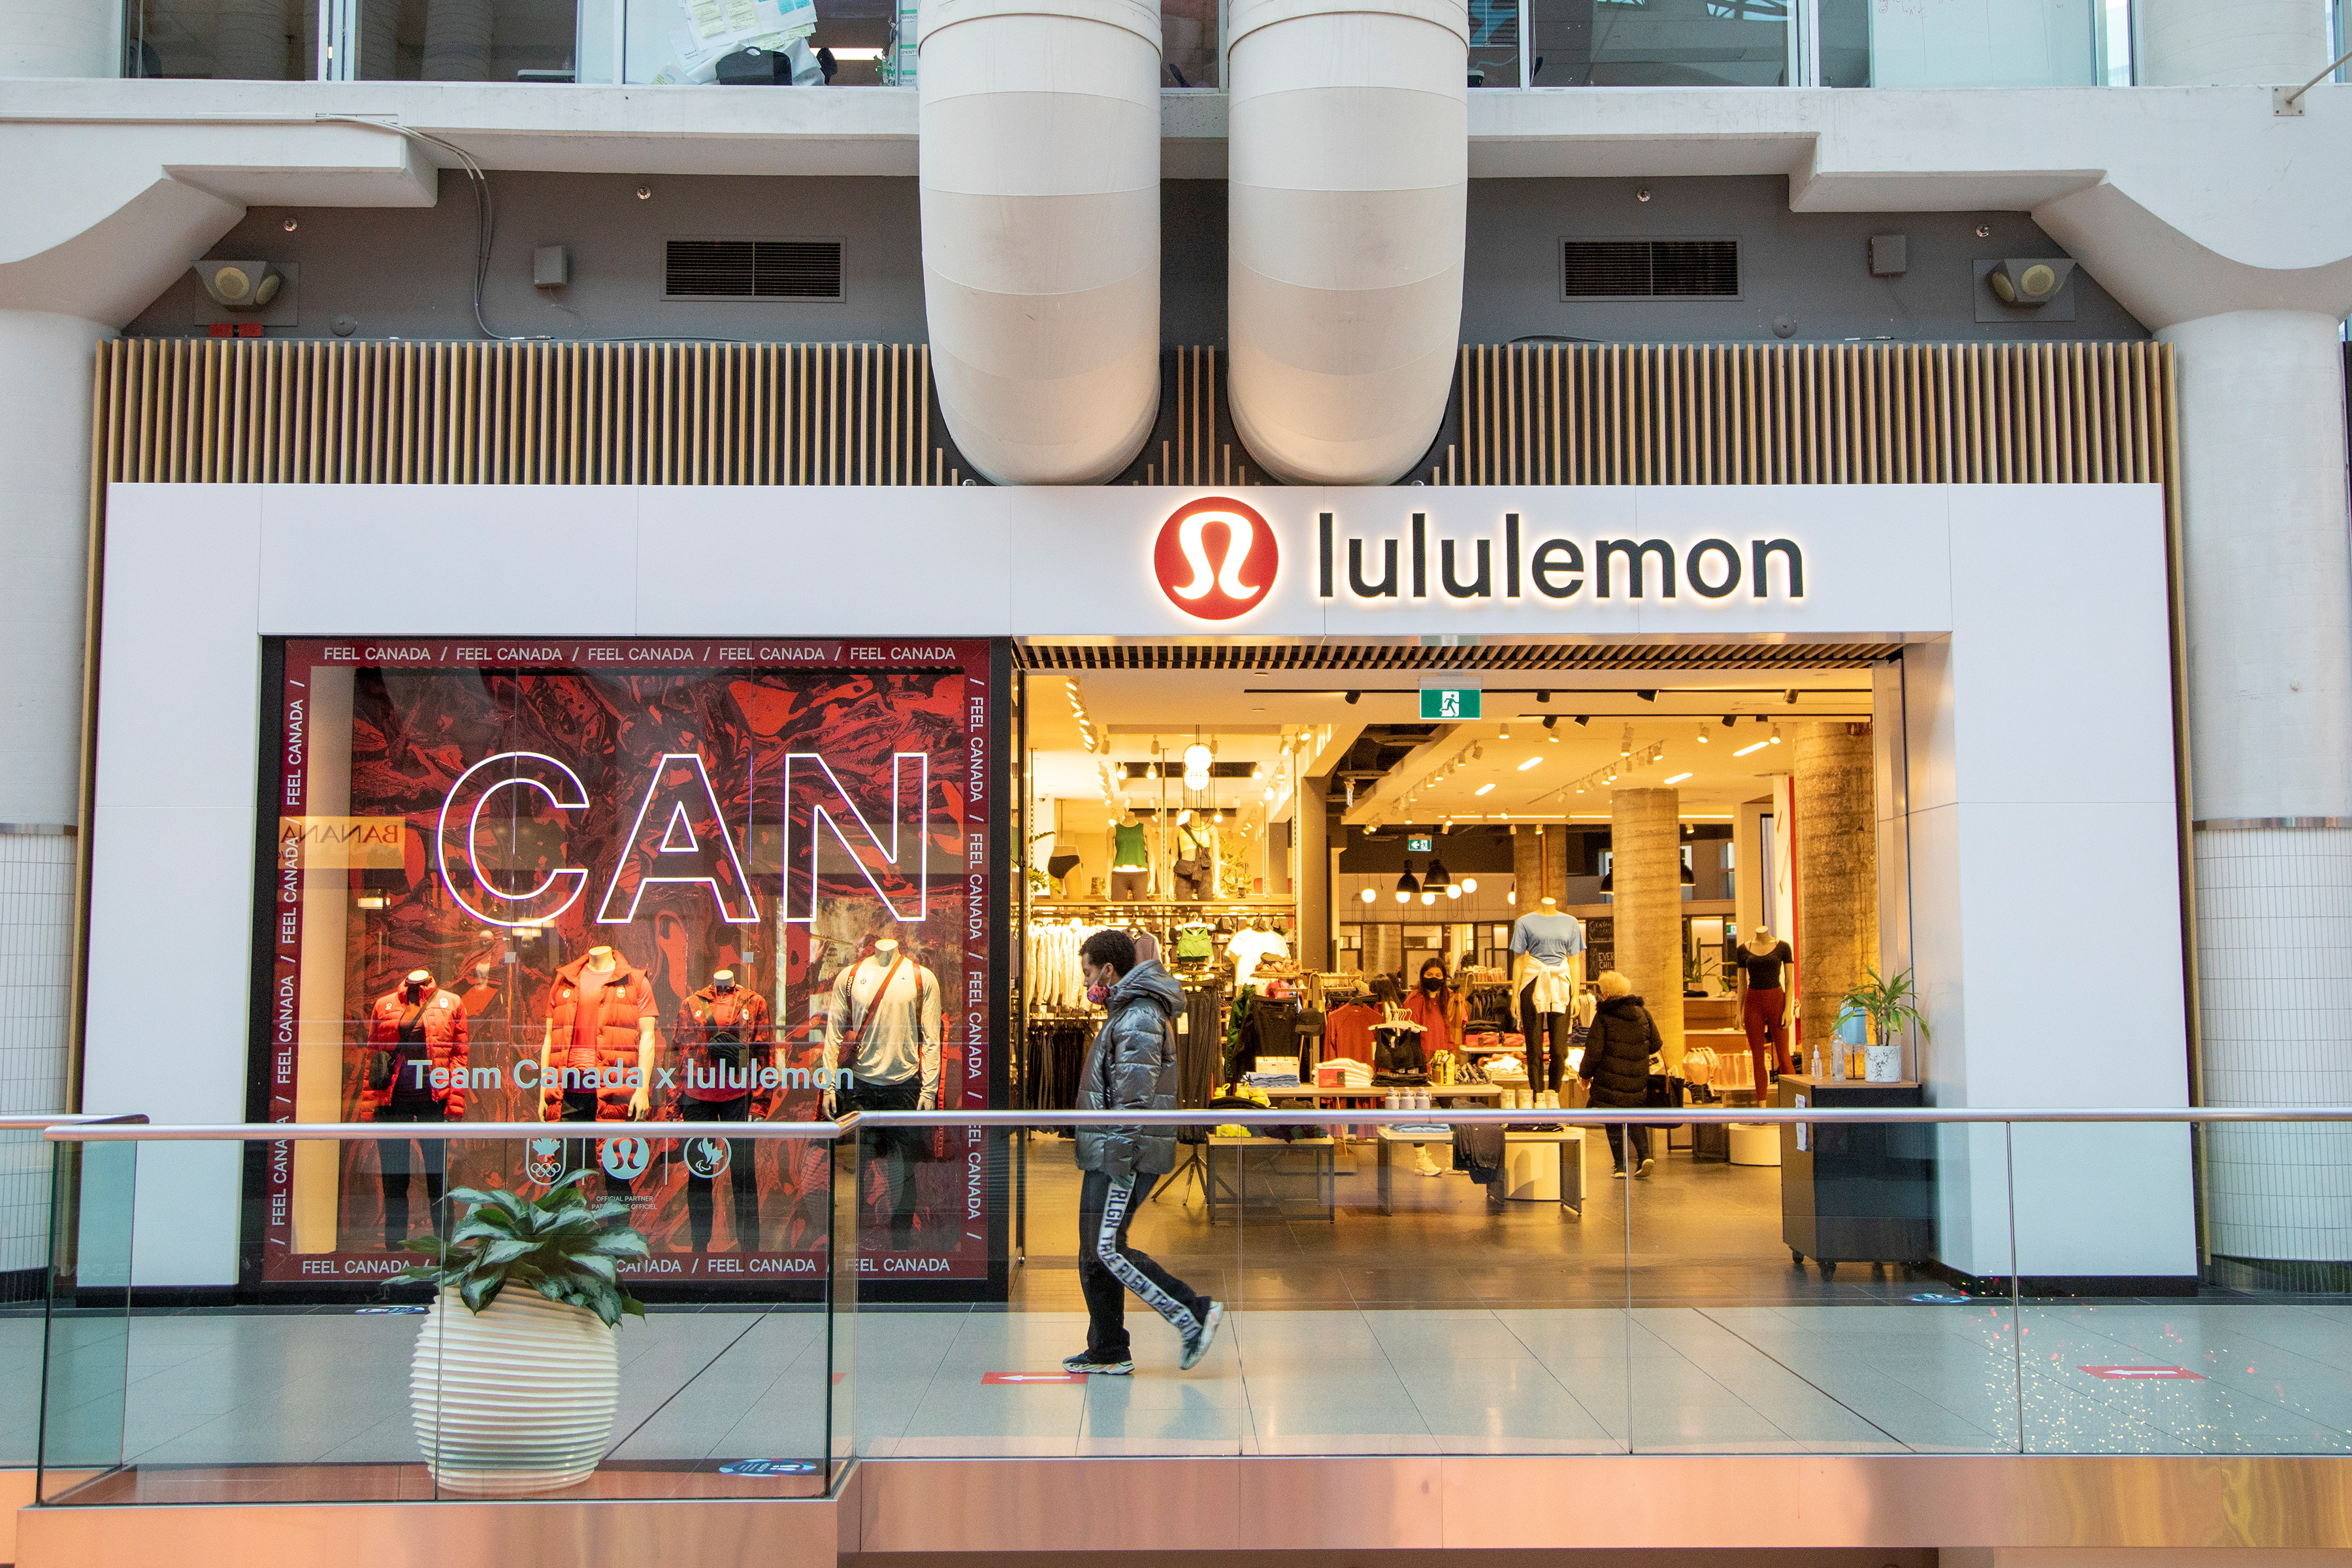 Lululemon Might Win Men Over with Powerful Strength to Be Ads